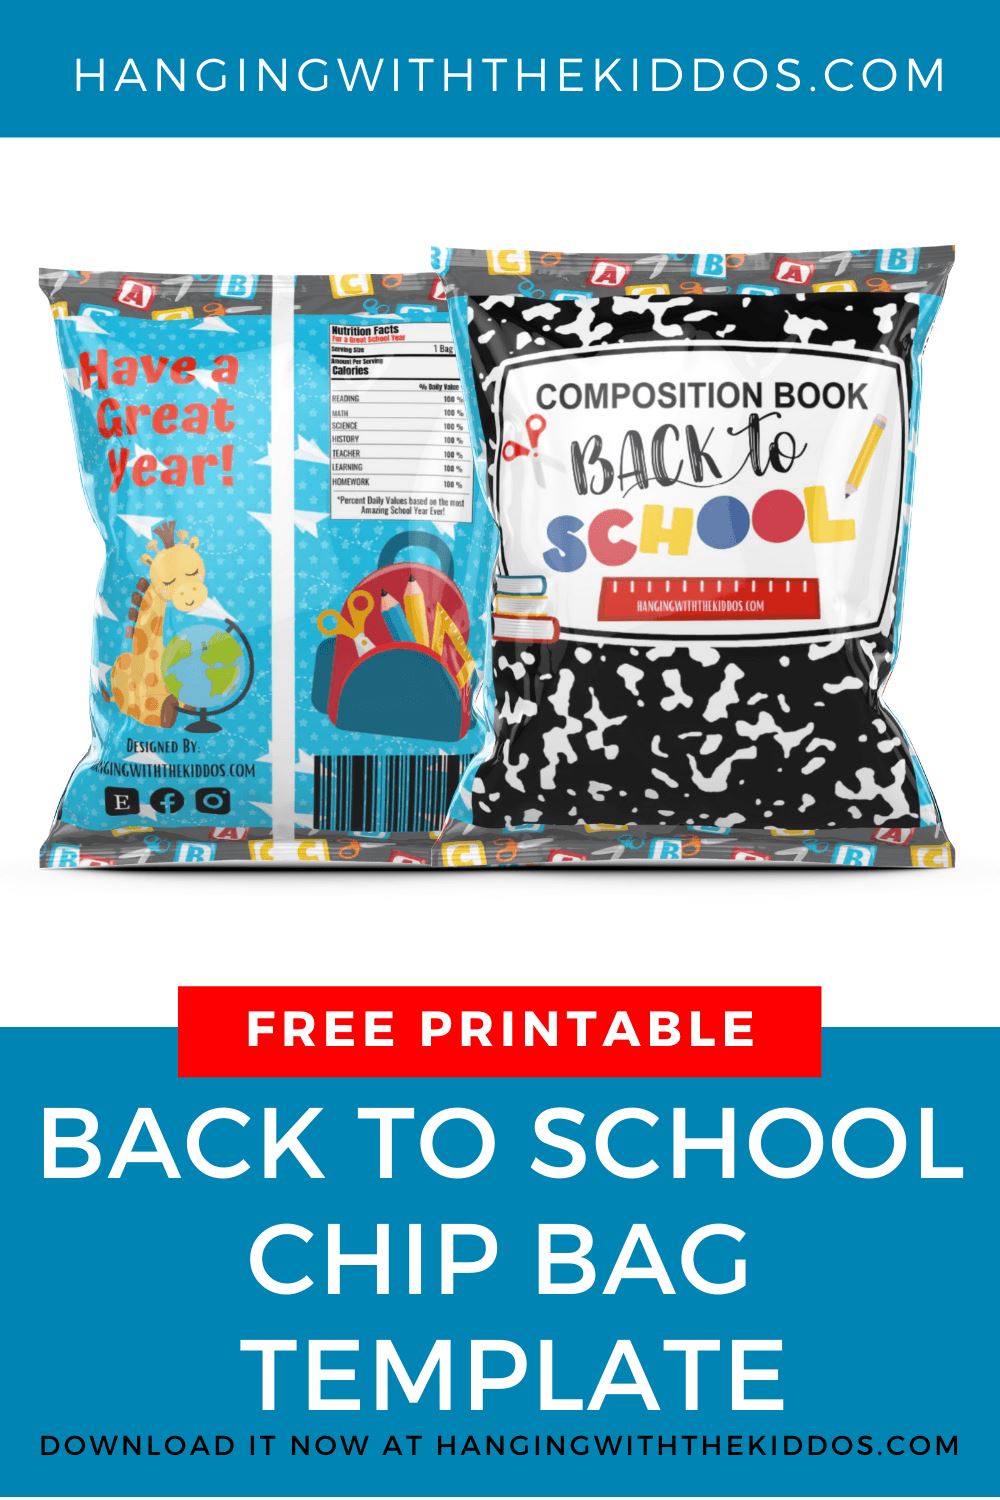 BACK TO SCHOOL CHIP BAG TEMPLATE